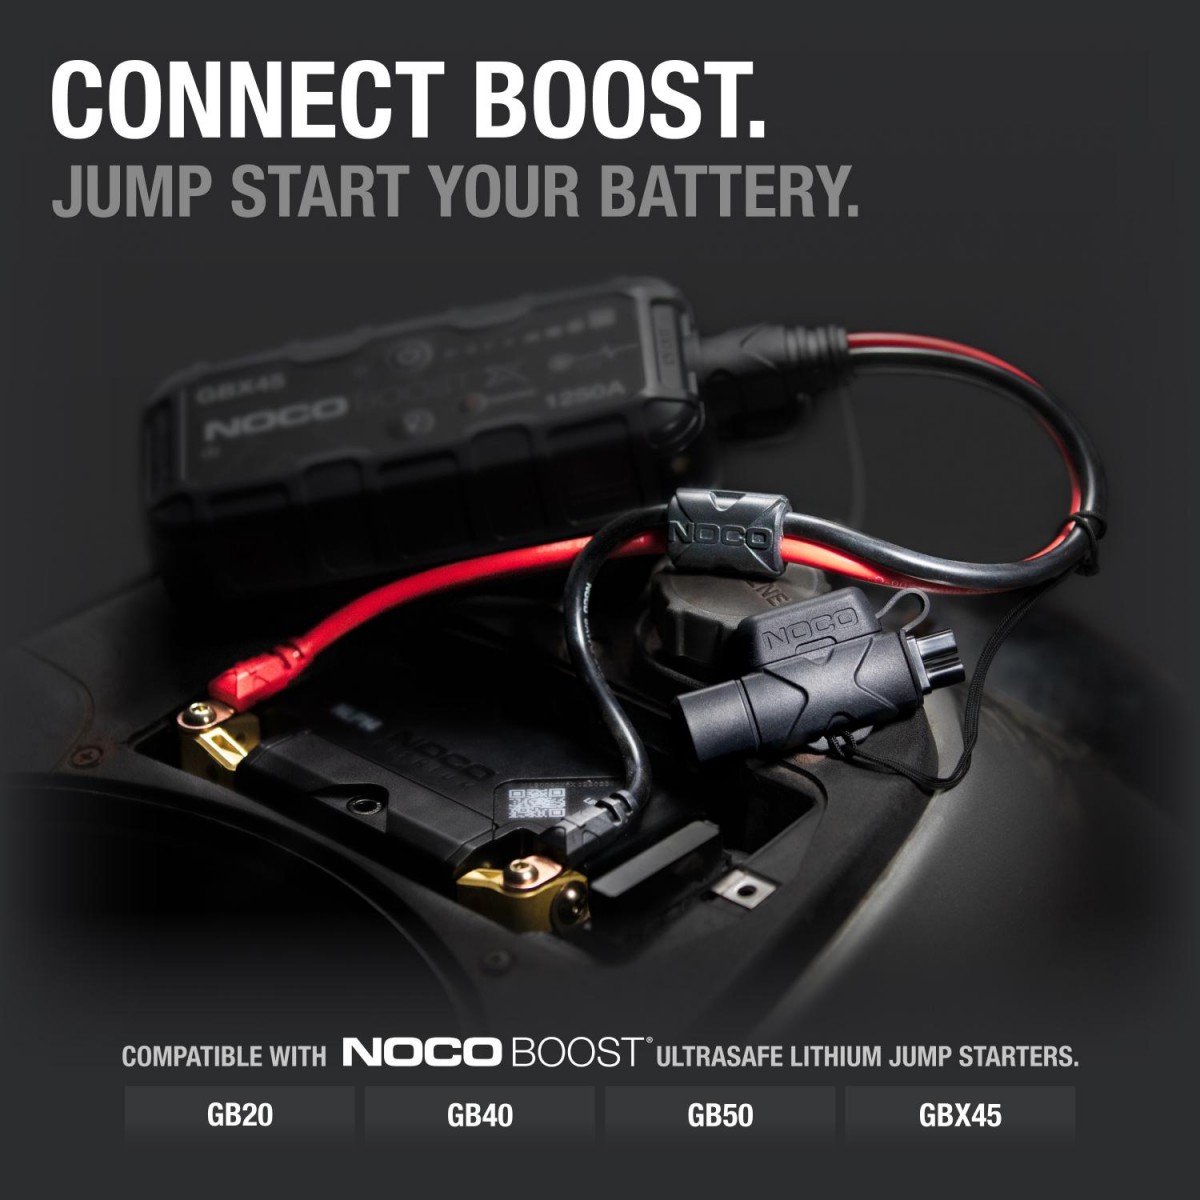 GBC007_Connected_To_NOCO_GBX45_Boost_Jump_Starter_And_Eyelets_Hardwired_To_Vespa_Battery_Terminals_Compatible_With_GB20_GB40_GB50_and_GBX45_Boost_Jump_Starters.jpg